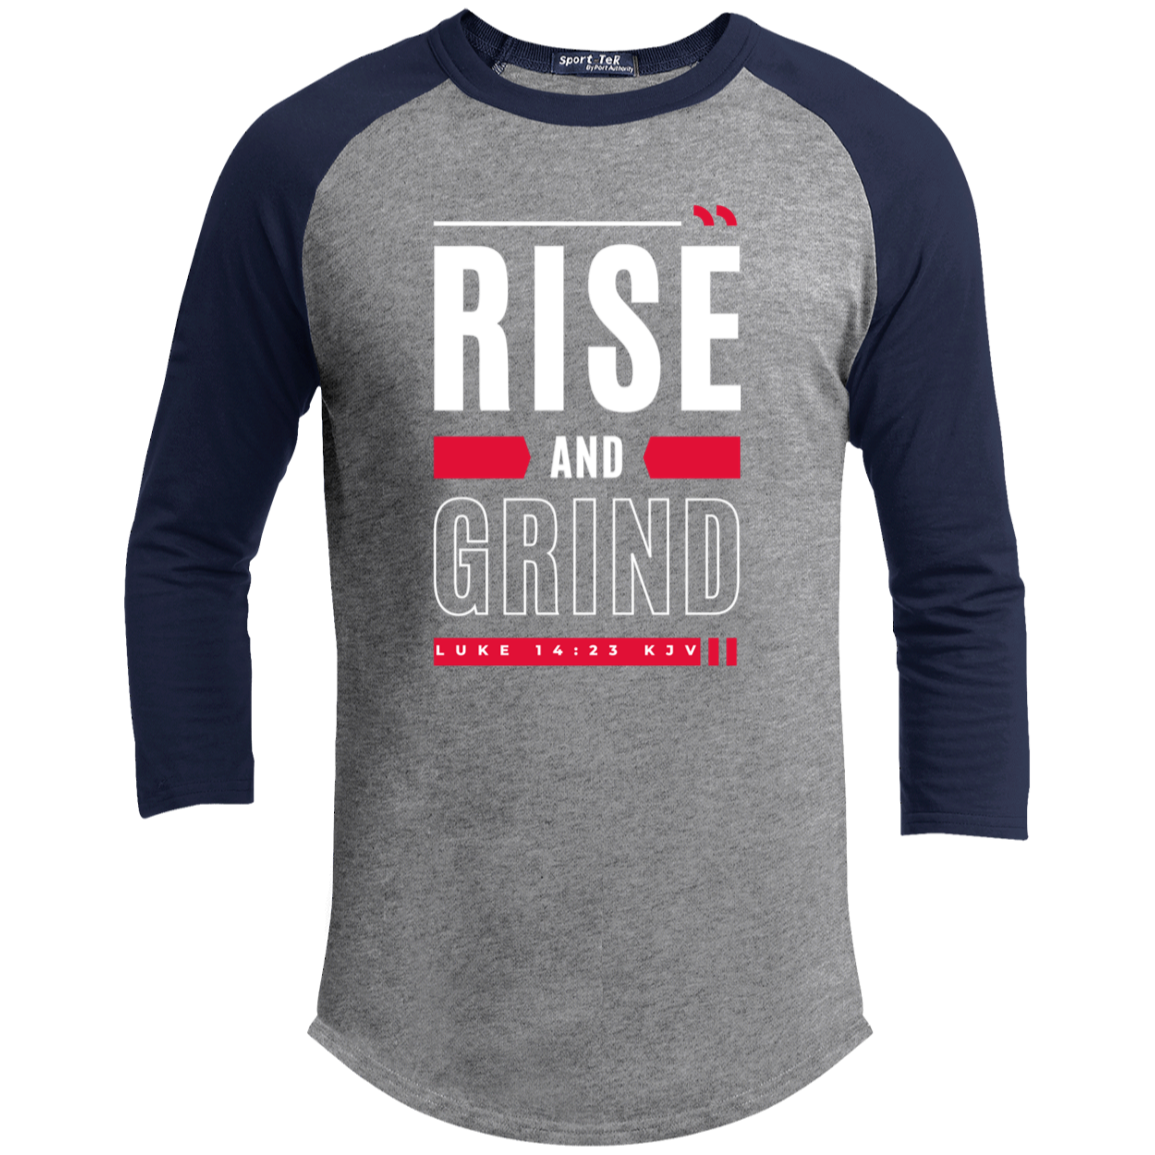 RISE AND GRIND 3/4 RAGLAN SLEEVE (YOUTH)